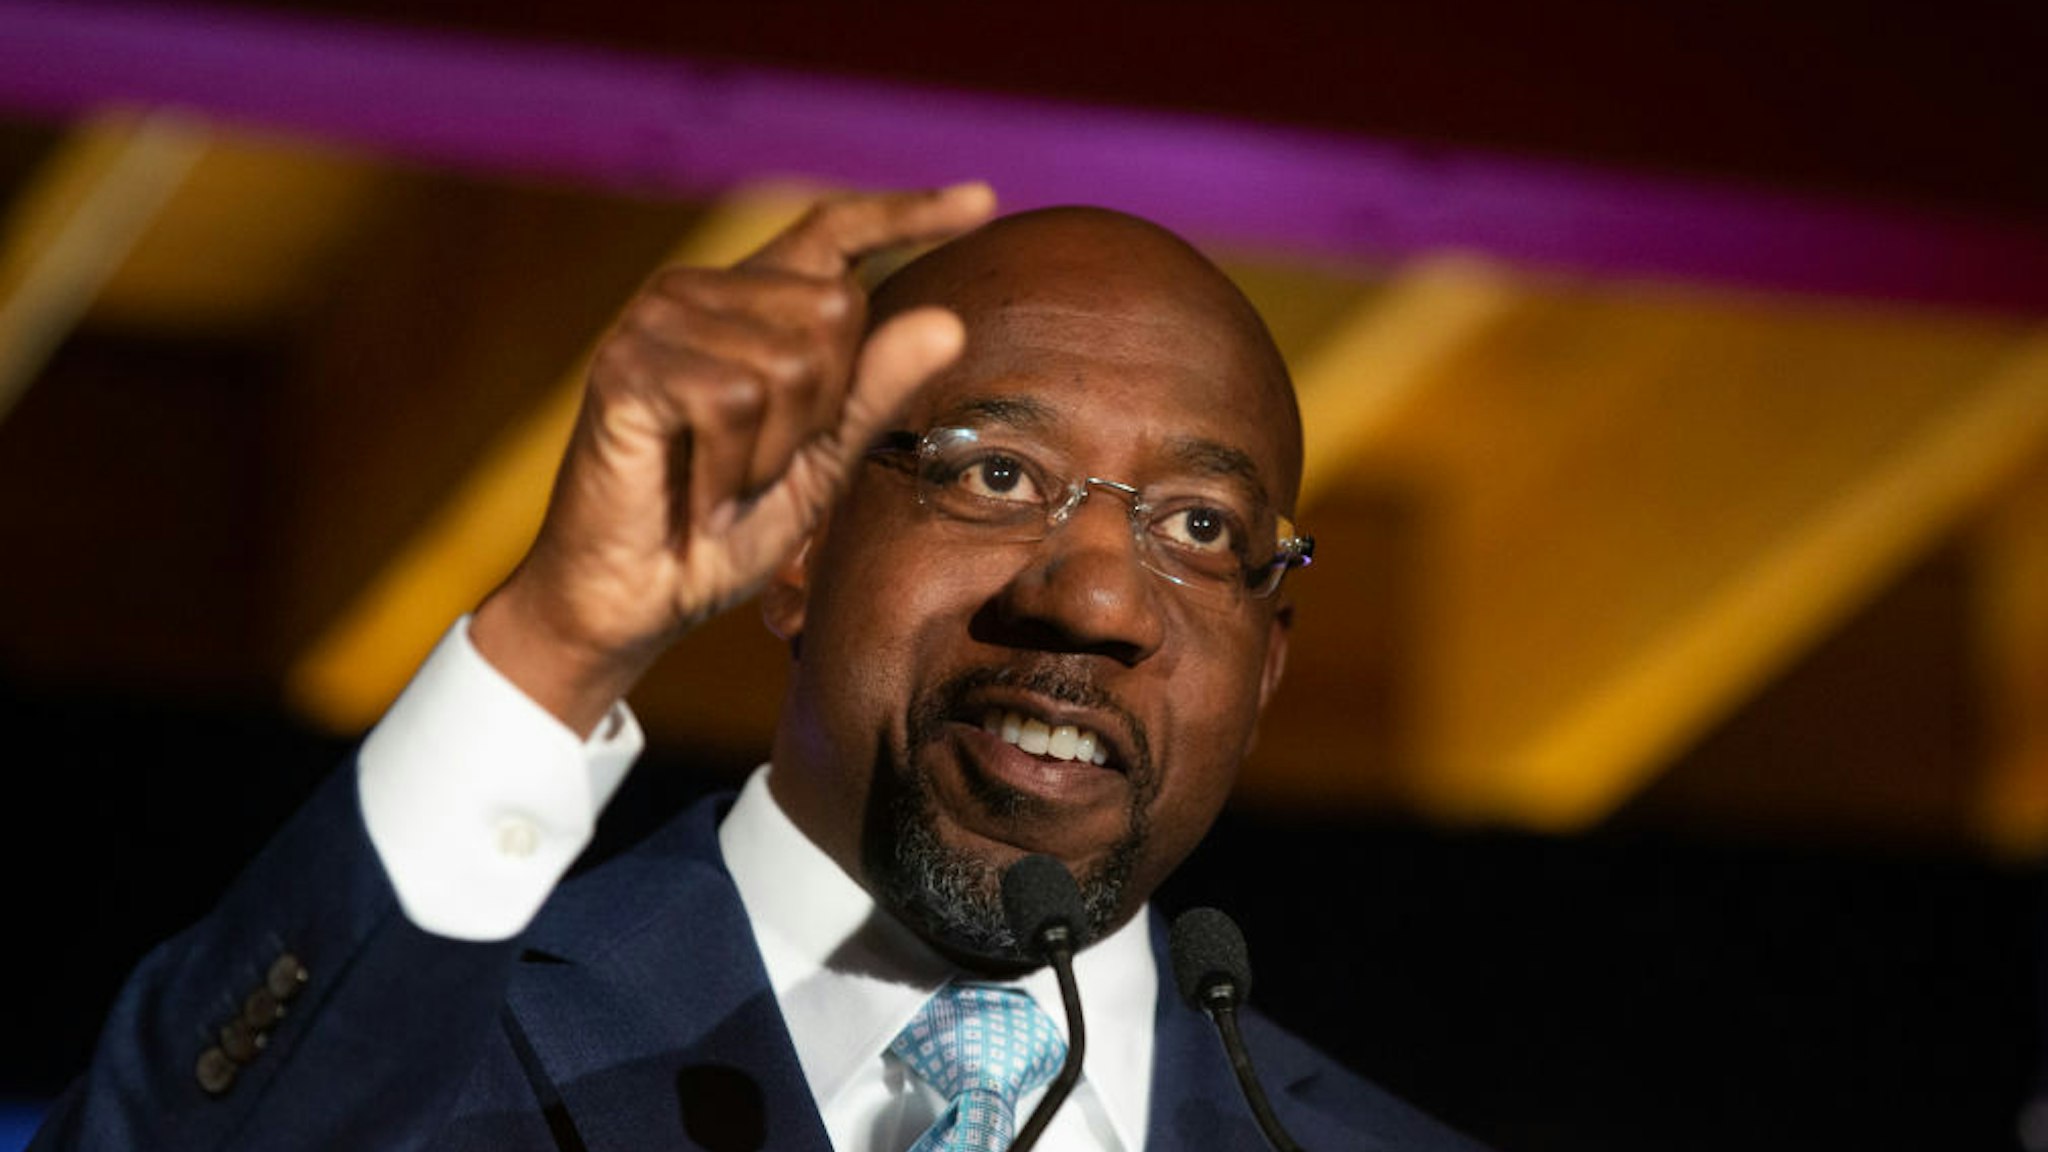 Democratic U.S. Senate candidate Rev. Raphael Warnock speaks during an Election Night event on November 3, 2020 in Atlanta, Georgia. Democratic Senate candidate Rev. Raphael Warnock is running in a special election against a crowded field, including U.S. Sen. Kelly Loeffler (R-GA), who was appointed by Gov. Brian Kemp to replace Johnny Isakson at the end of last year. Georgia is the only state with two Senate seats on the November 3 ballot. (Photo by Jessica McGowan/Getty Images)